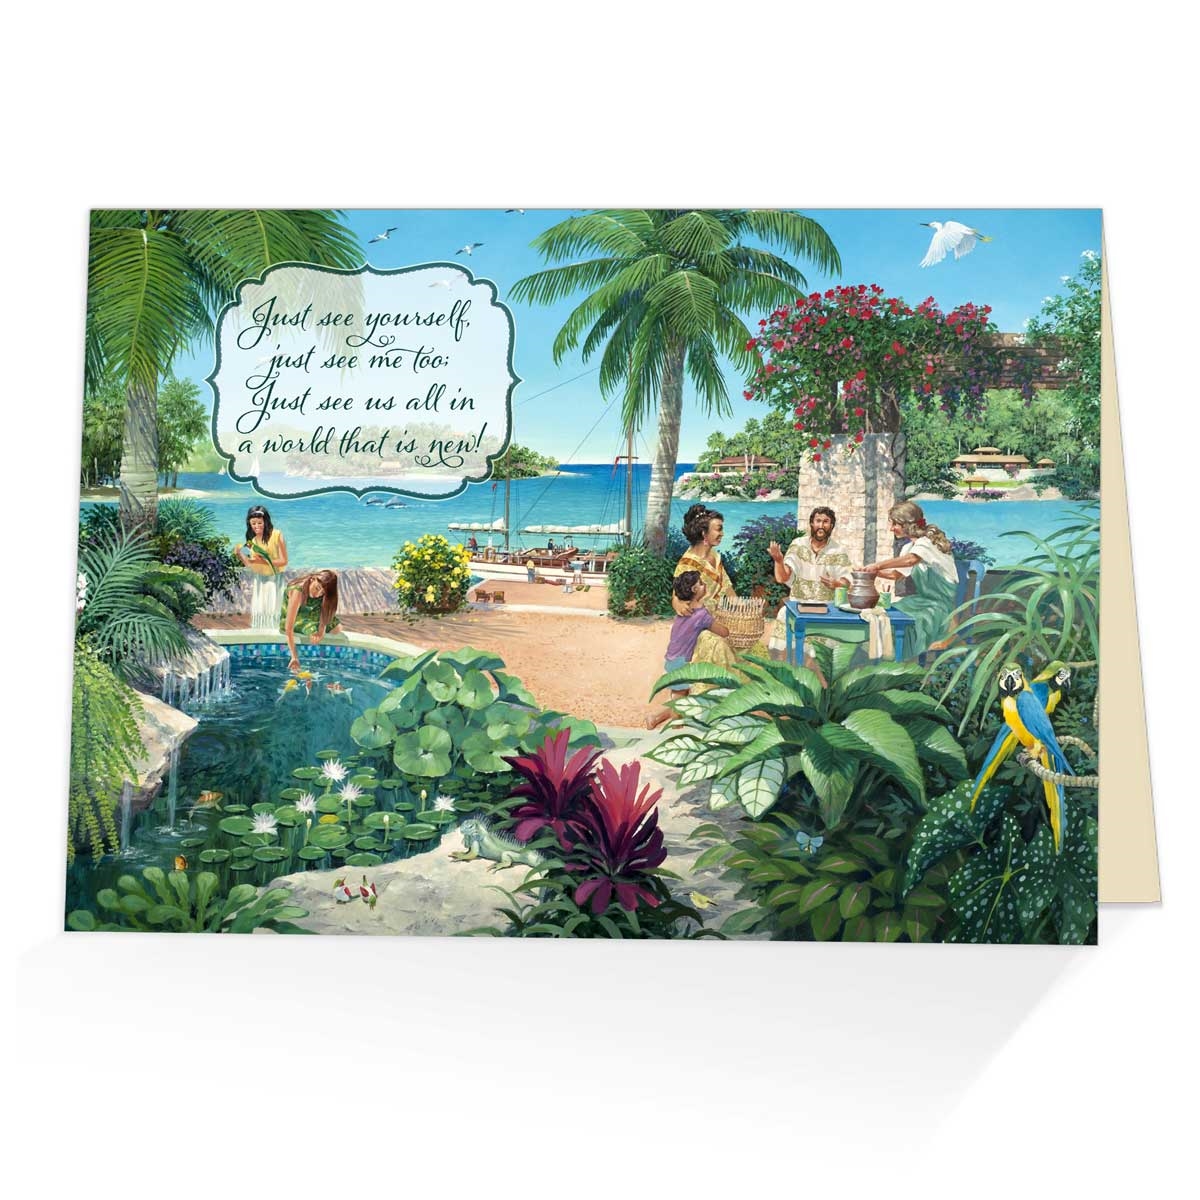 Just see us all in a world that is new! | JW Paradise Greeting Card